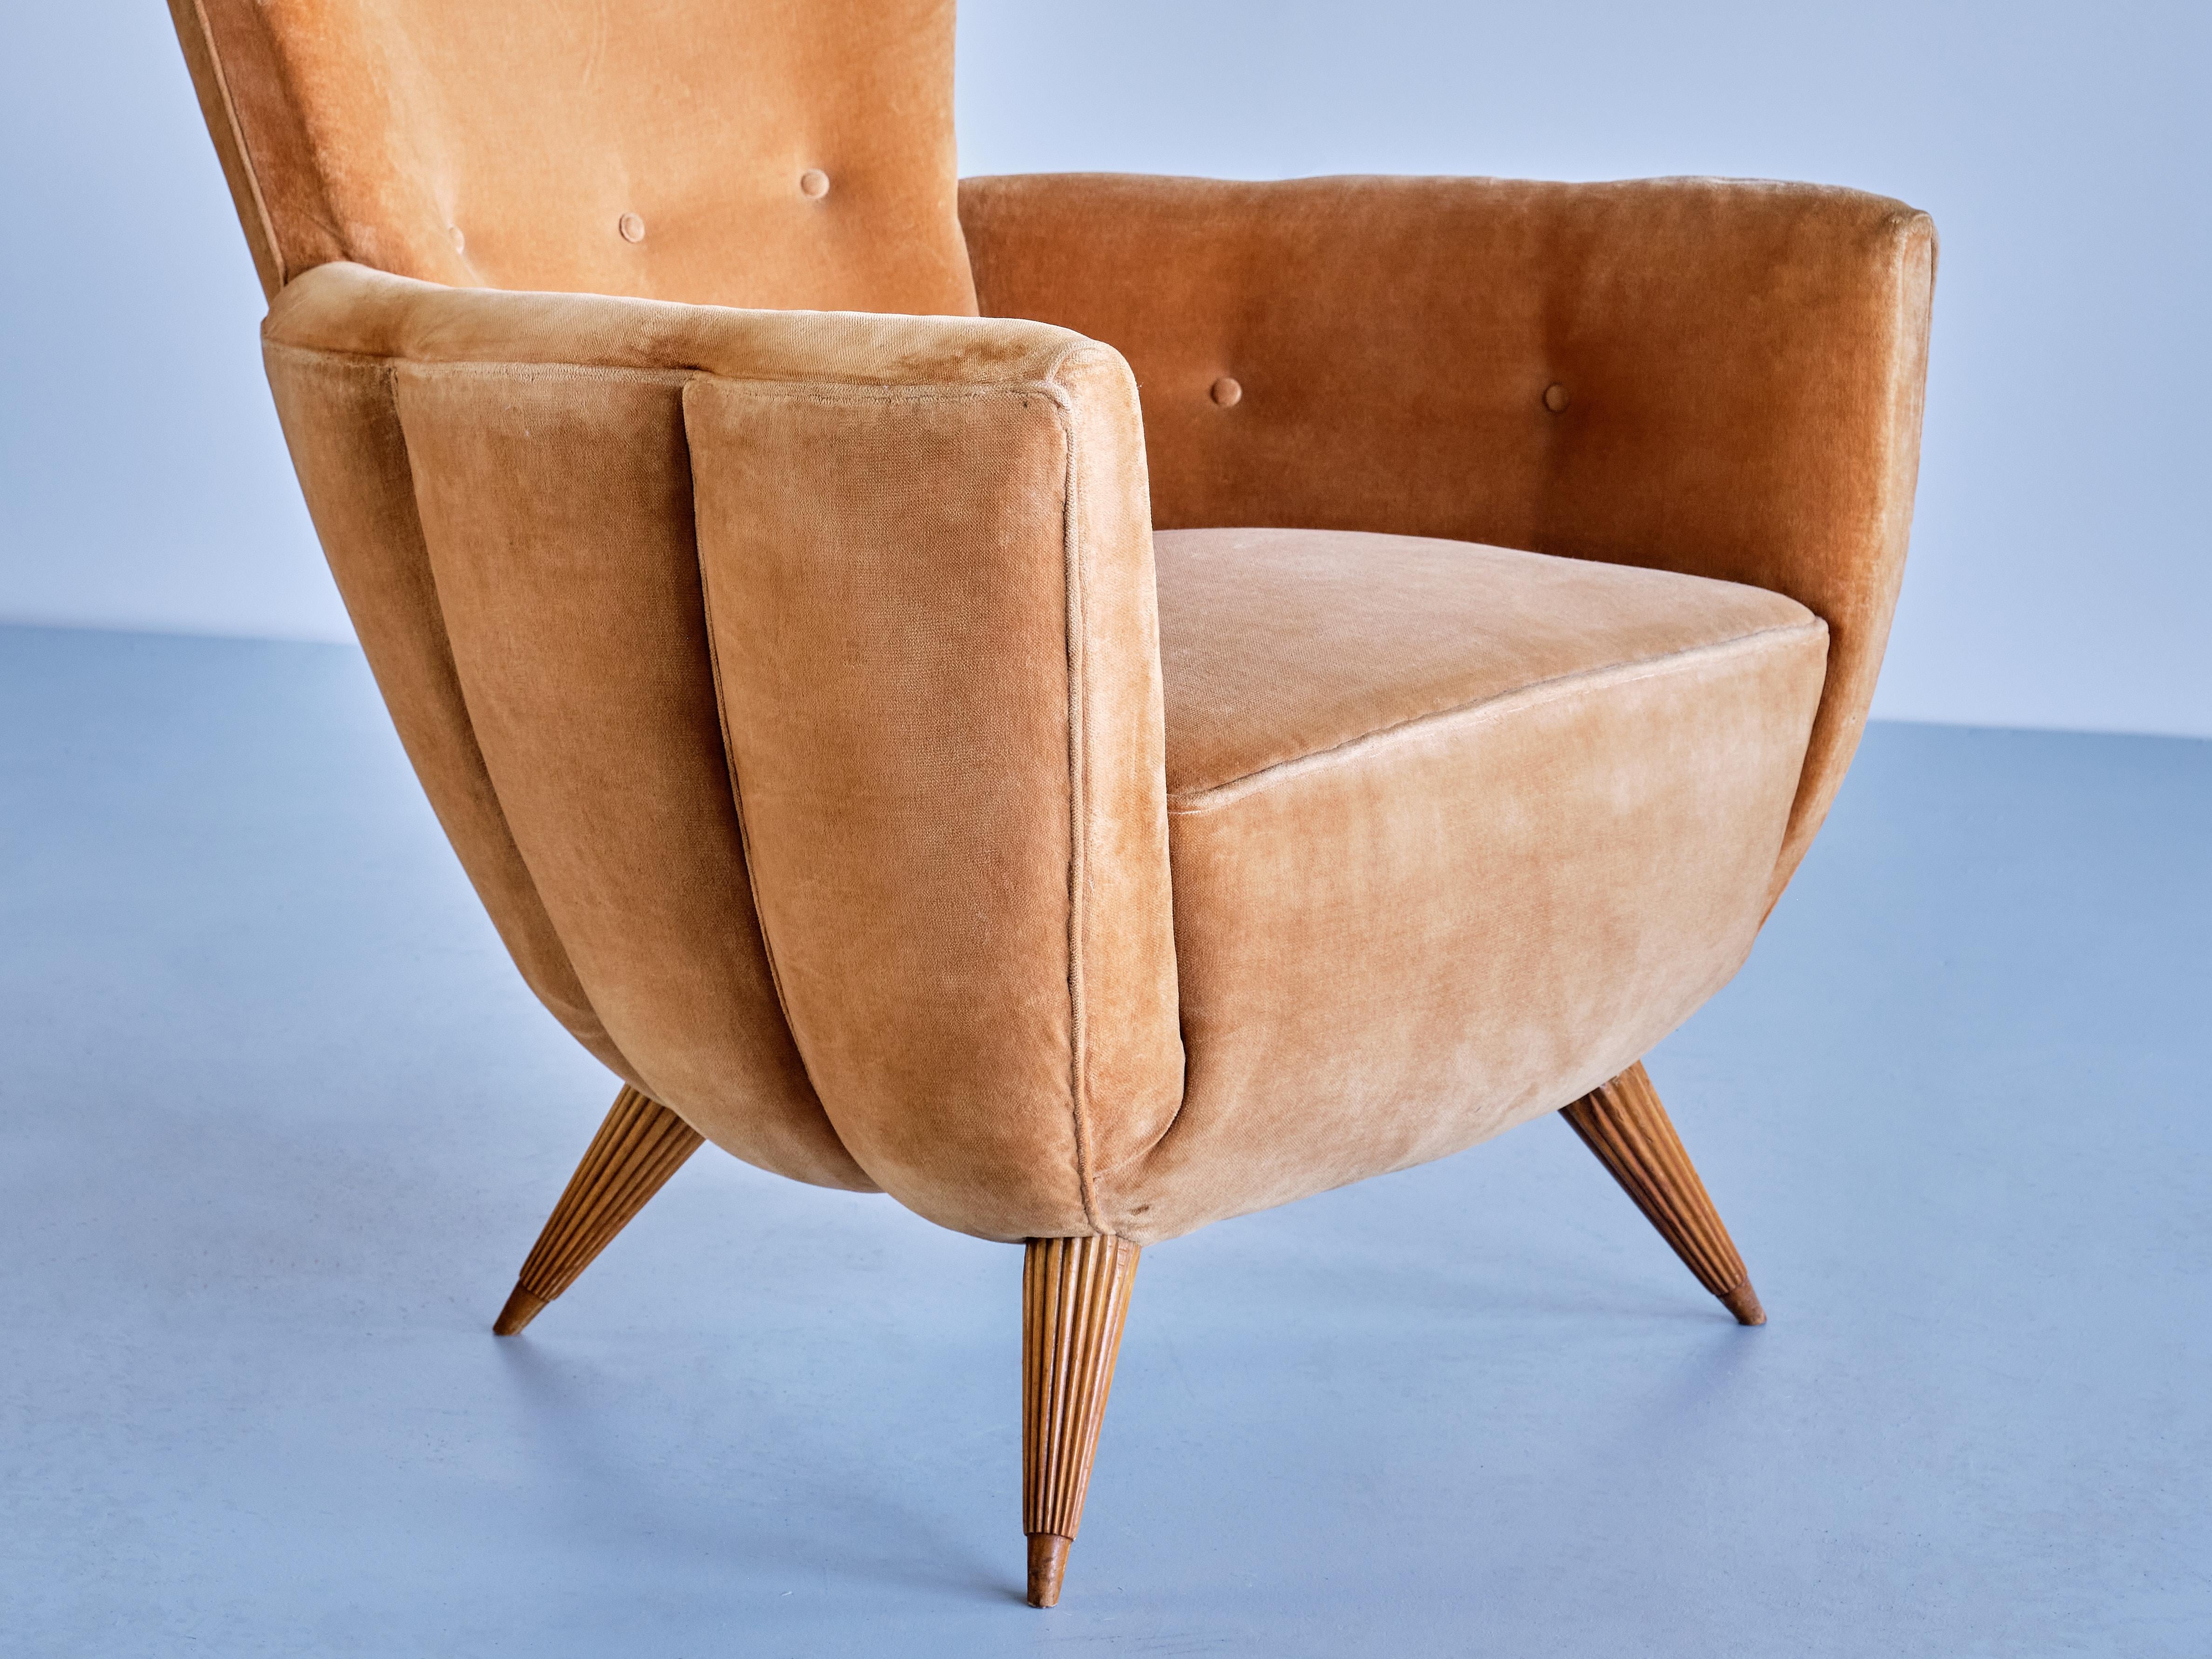 Exceptional Guglielmo Ulrich Armchair in Velvet and Fluted Walnut, Italy, 1940s For Sale 8